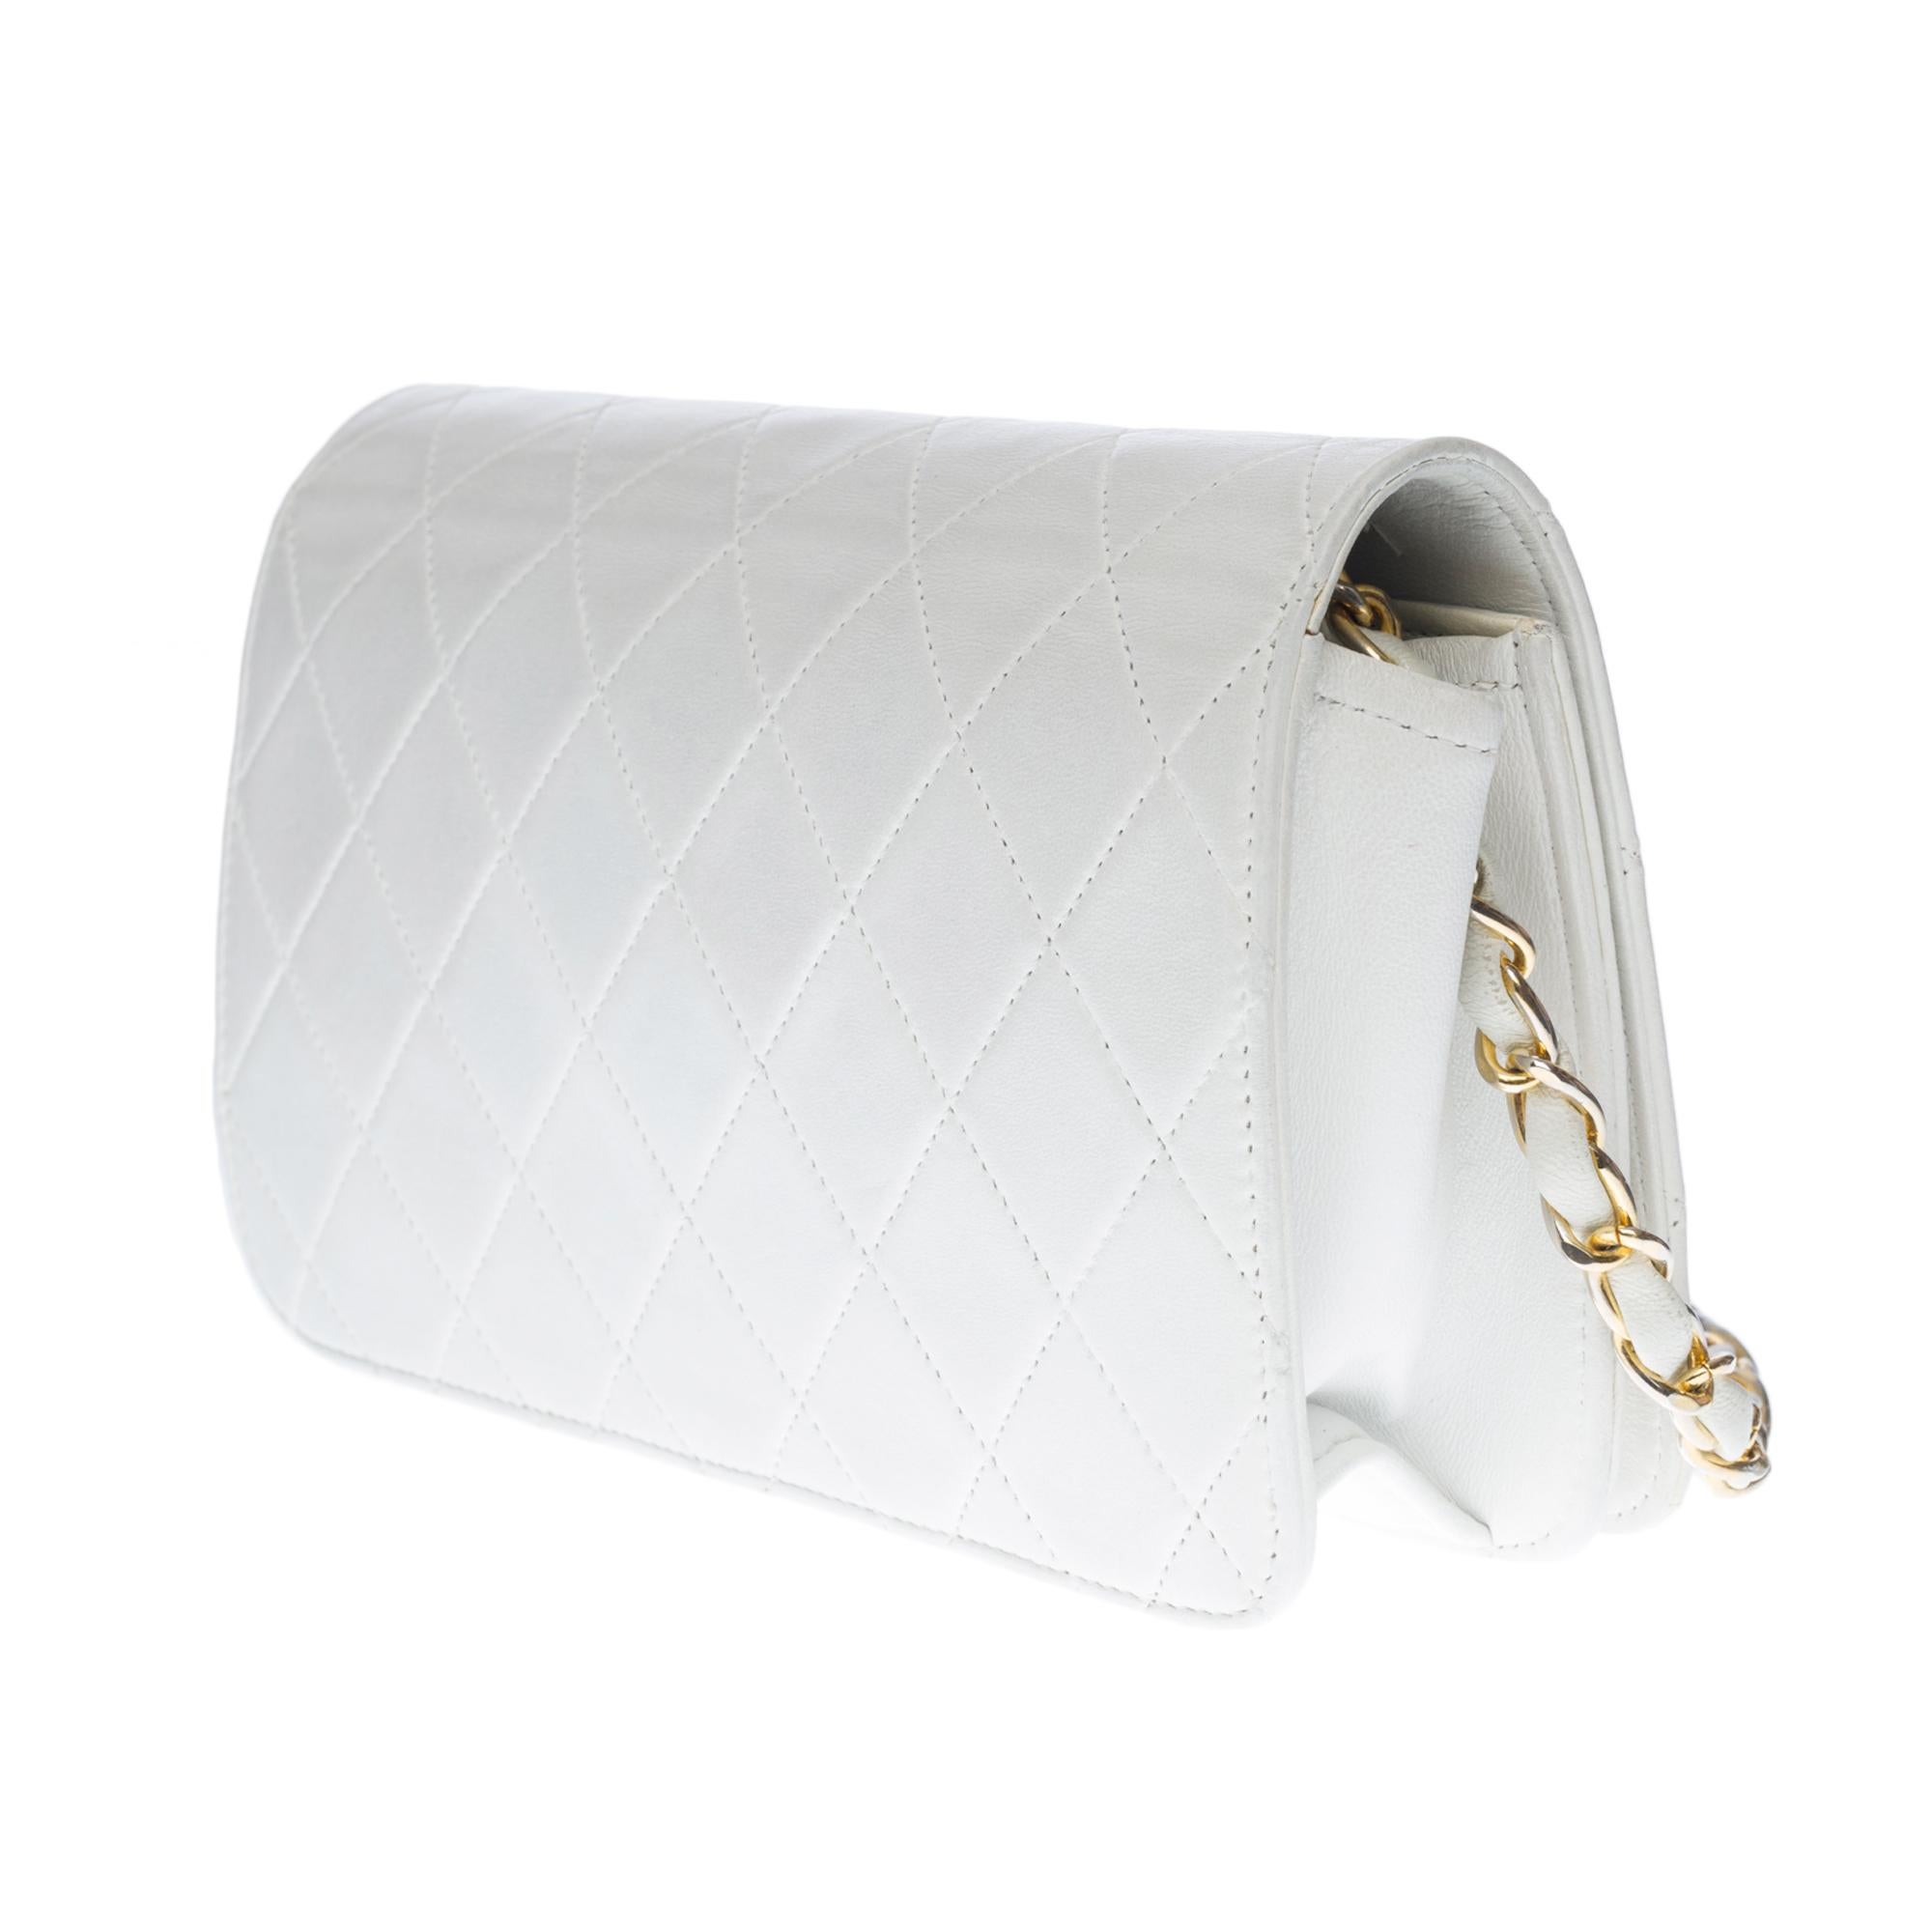 Women's Chanel Full flap Mini shoulder bag in white quilted lambskin, GHW